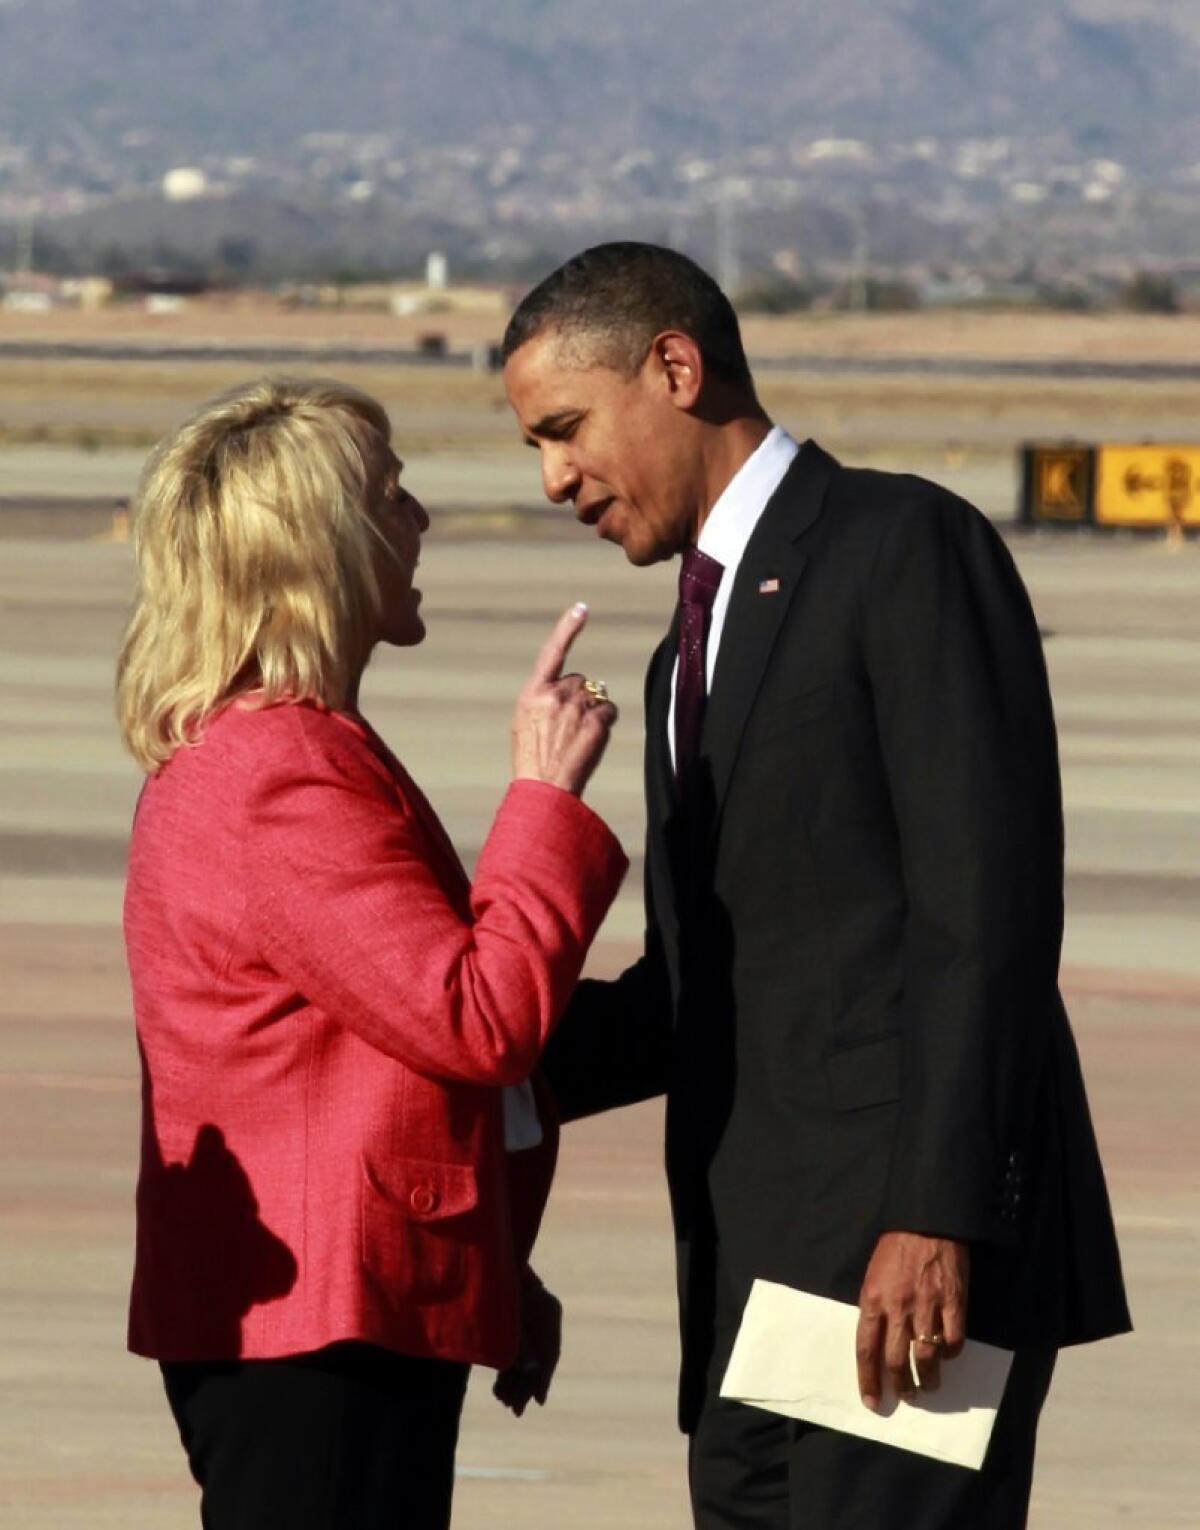 Arizona Gov. Jan Brewer has an intense conversation with President Obama in January 2012 after his plane landed in Mesa, Ariz. Their meeting this time, on the tarmac at Phoenix Sky Harbor International Airport, was friendlier.